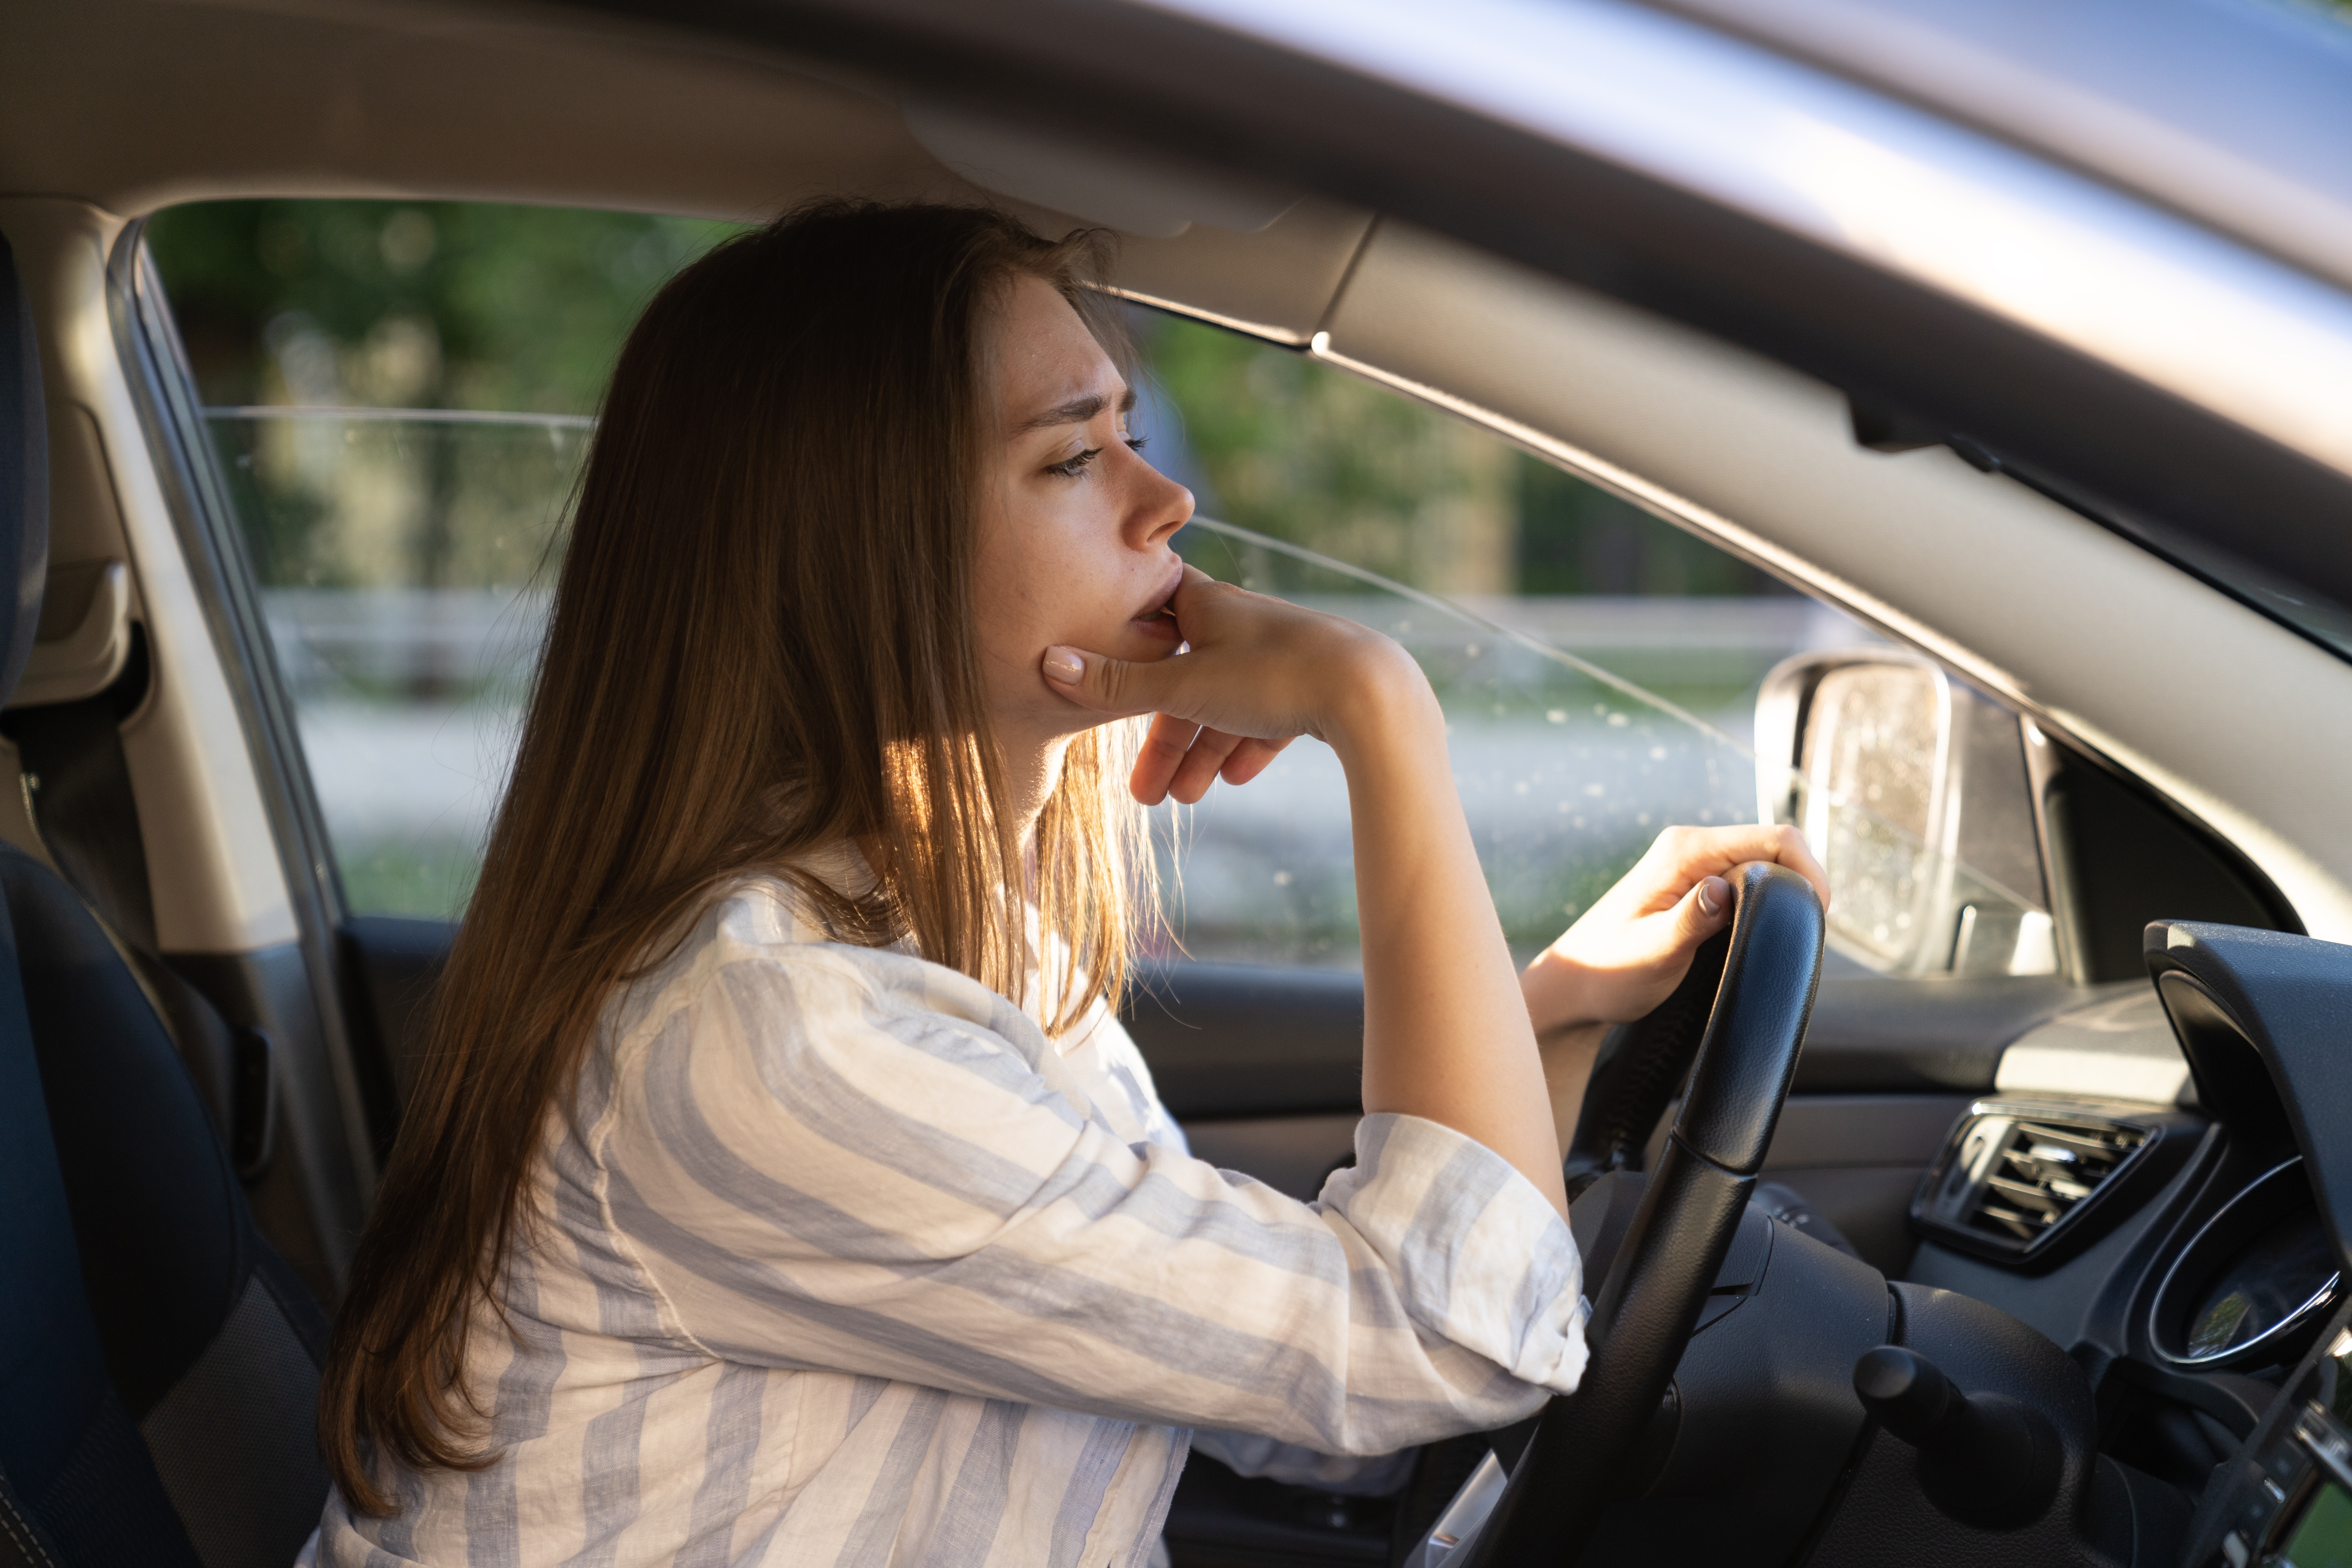 A woman lost in her thoughts while driving | Source: Shutterstock